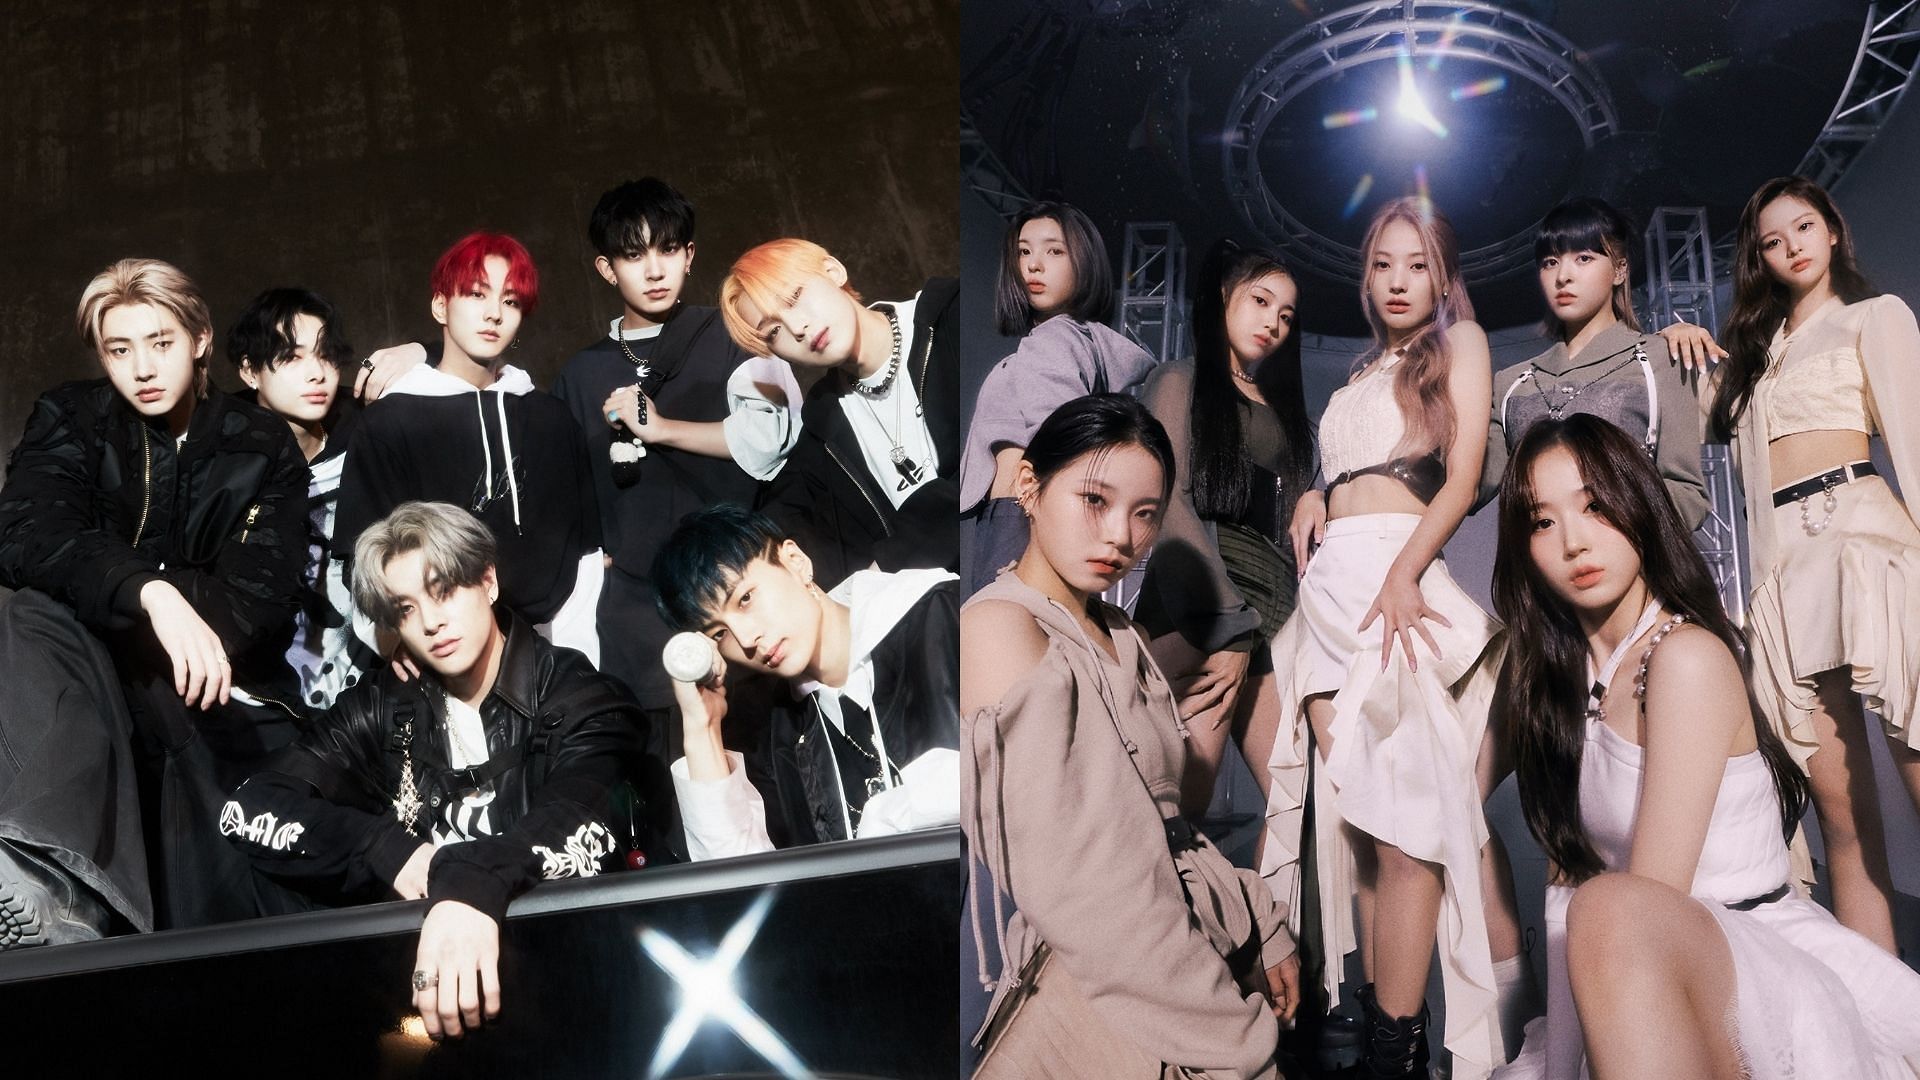 ENHYPEN and NMIXX are among the few groups revealed as the first set of performers for the 2022 KCON in Los Angeles (Images via @BELIFTLAB and NMIXX_official/Twitter)